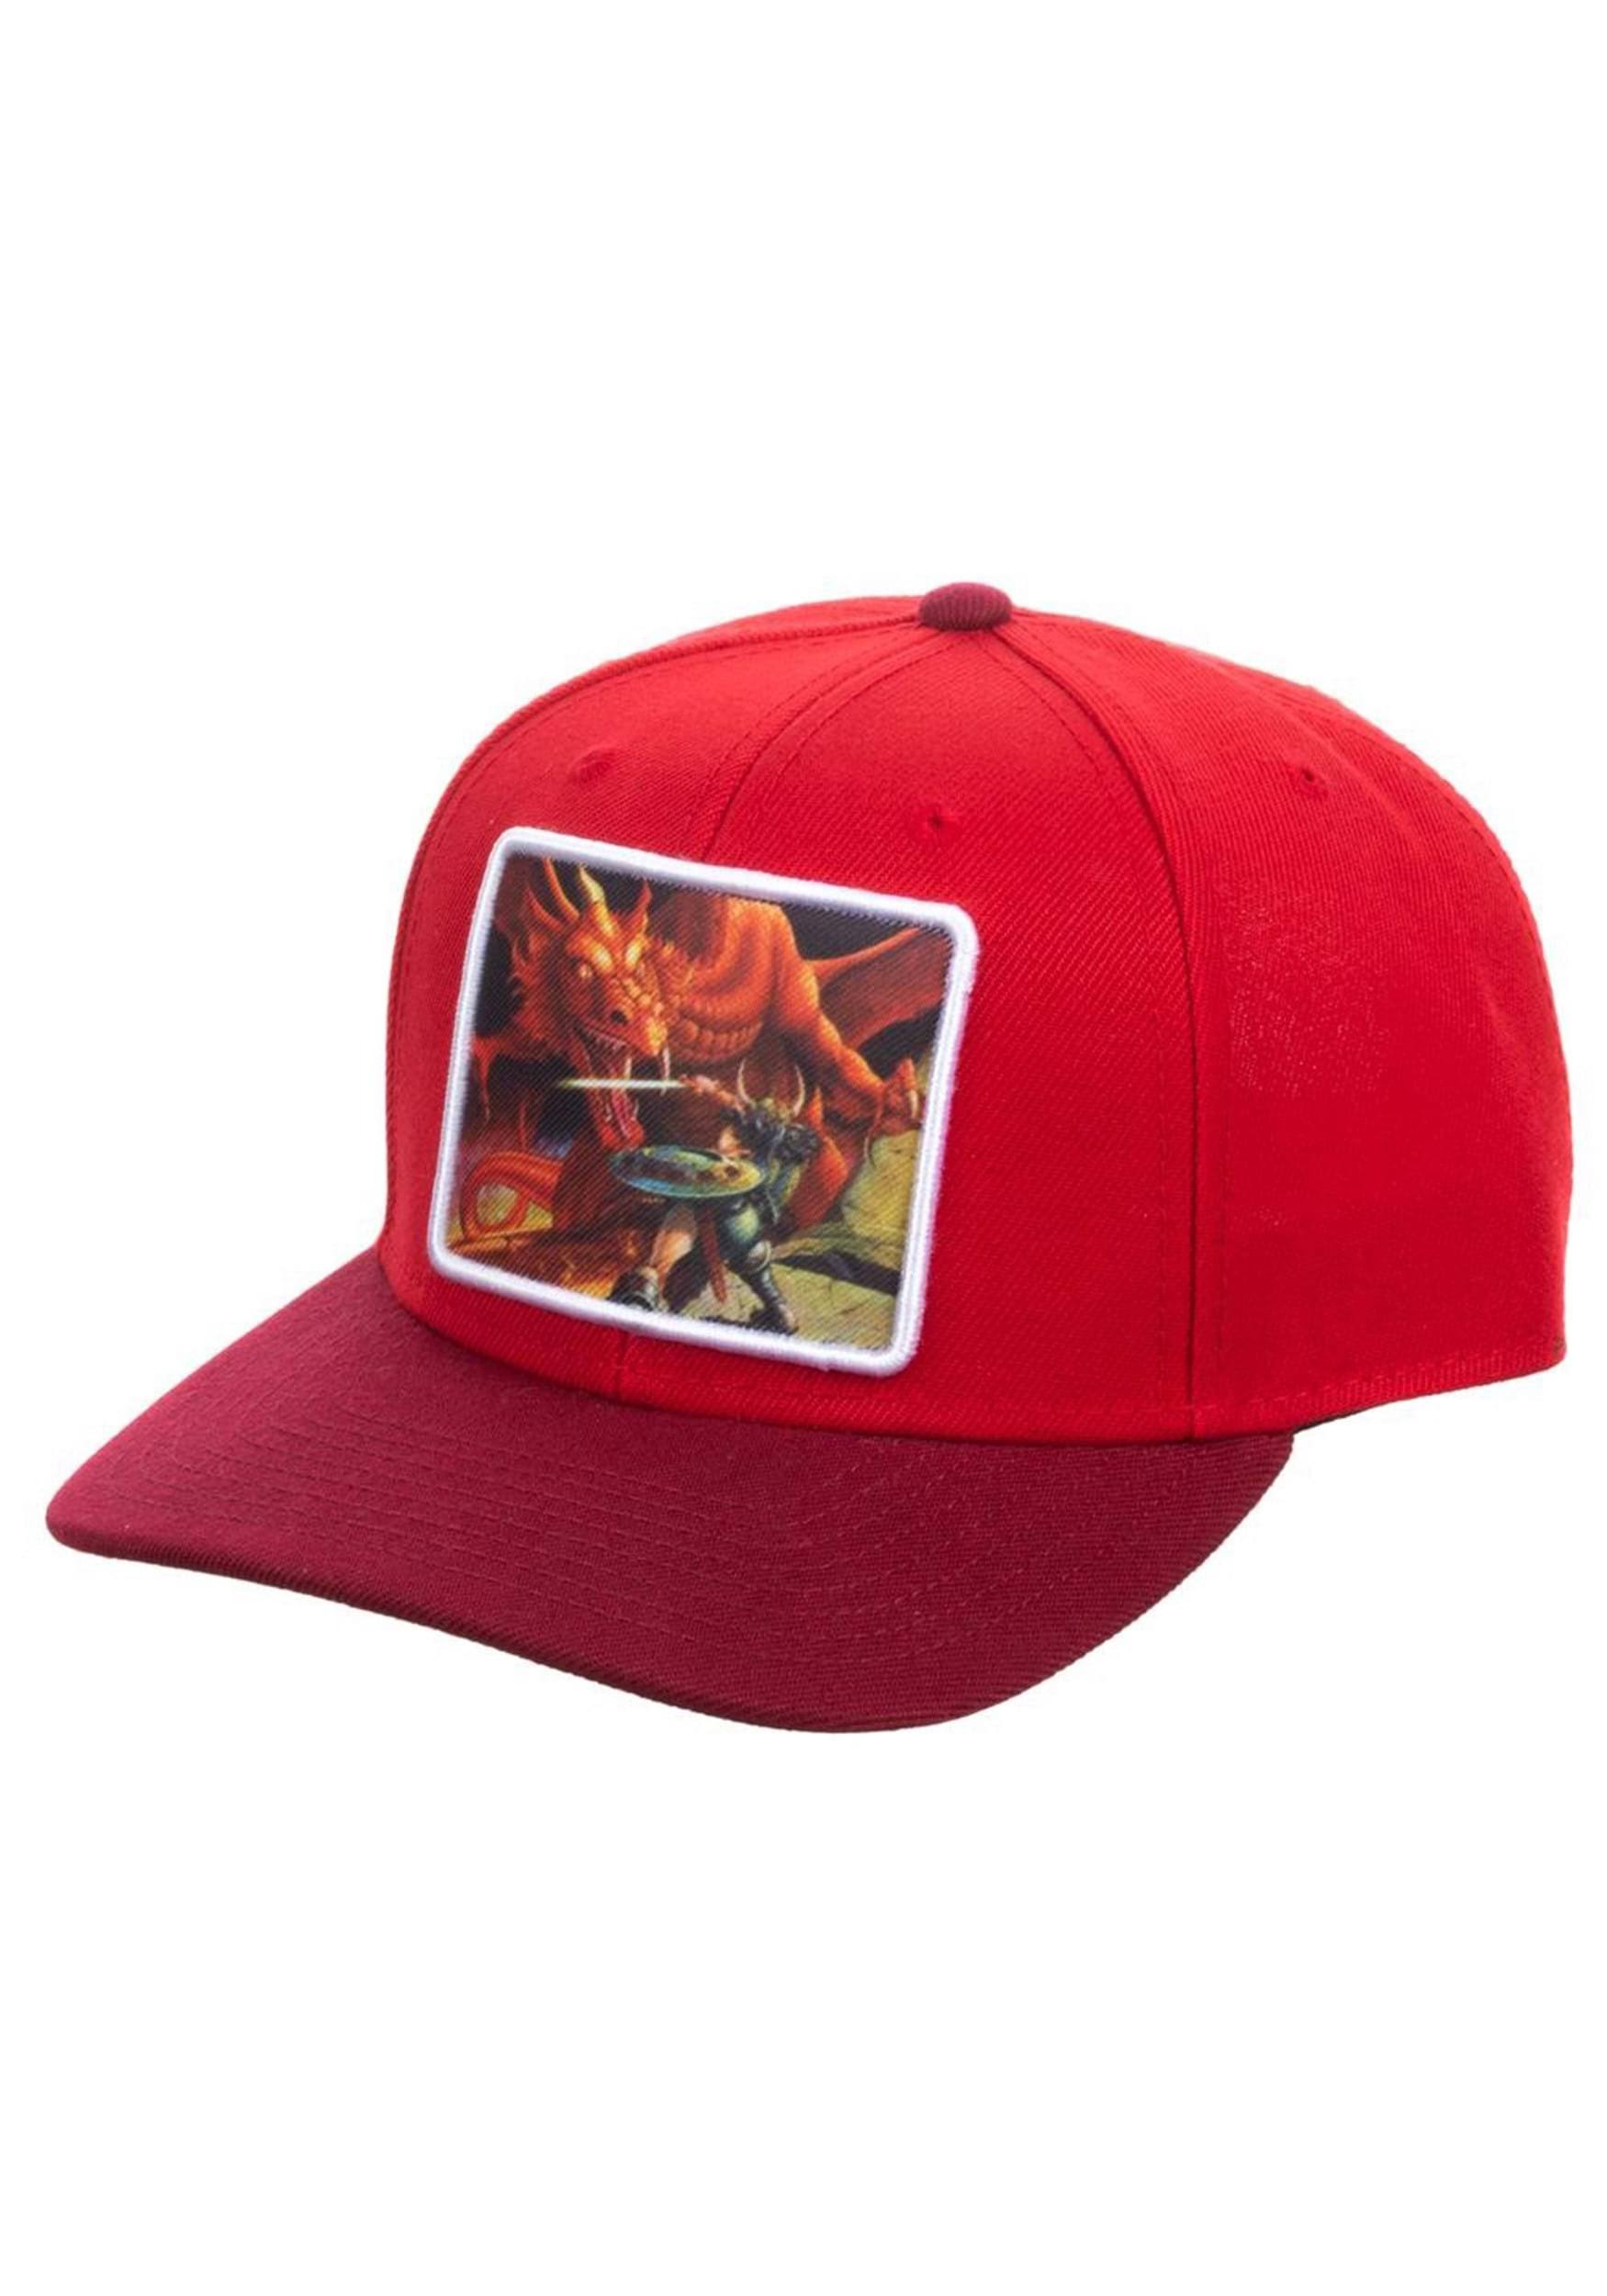 Dungeons & Dragons Snapback Hat